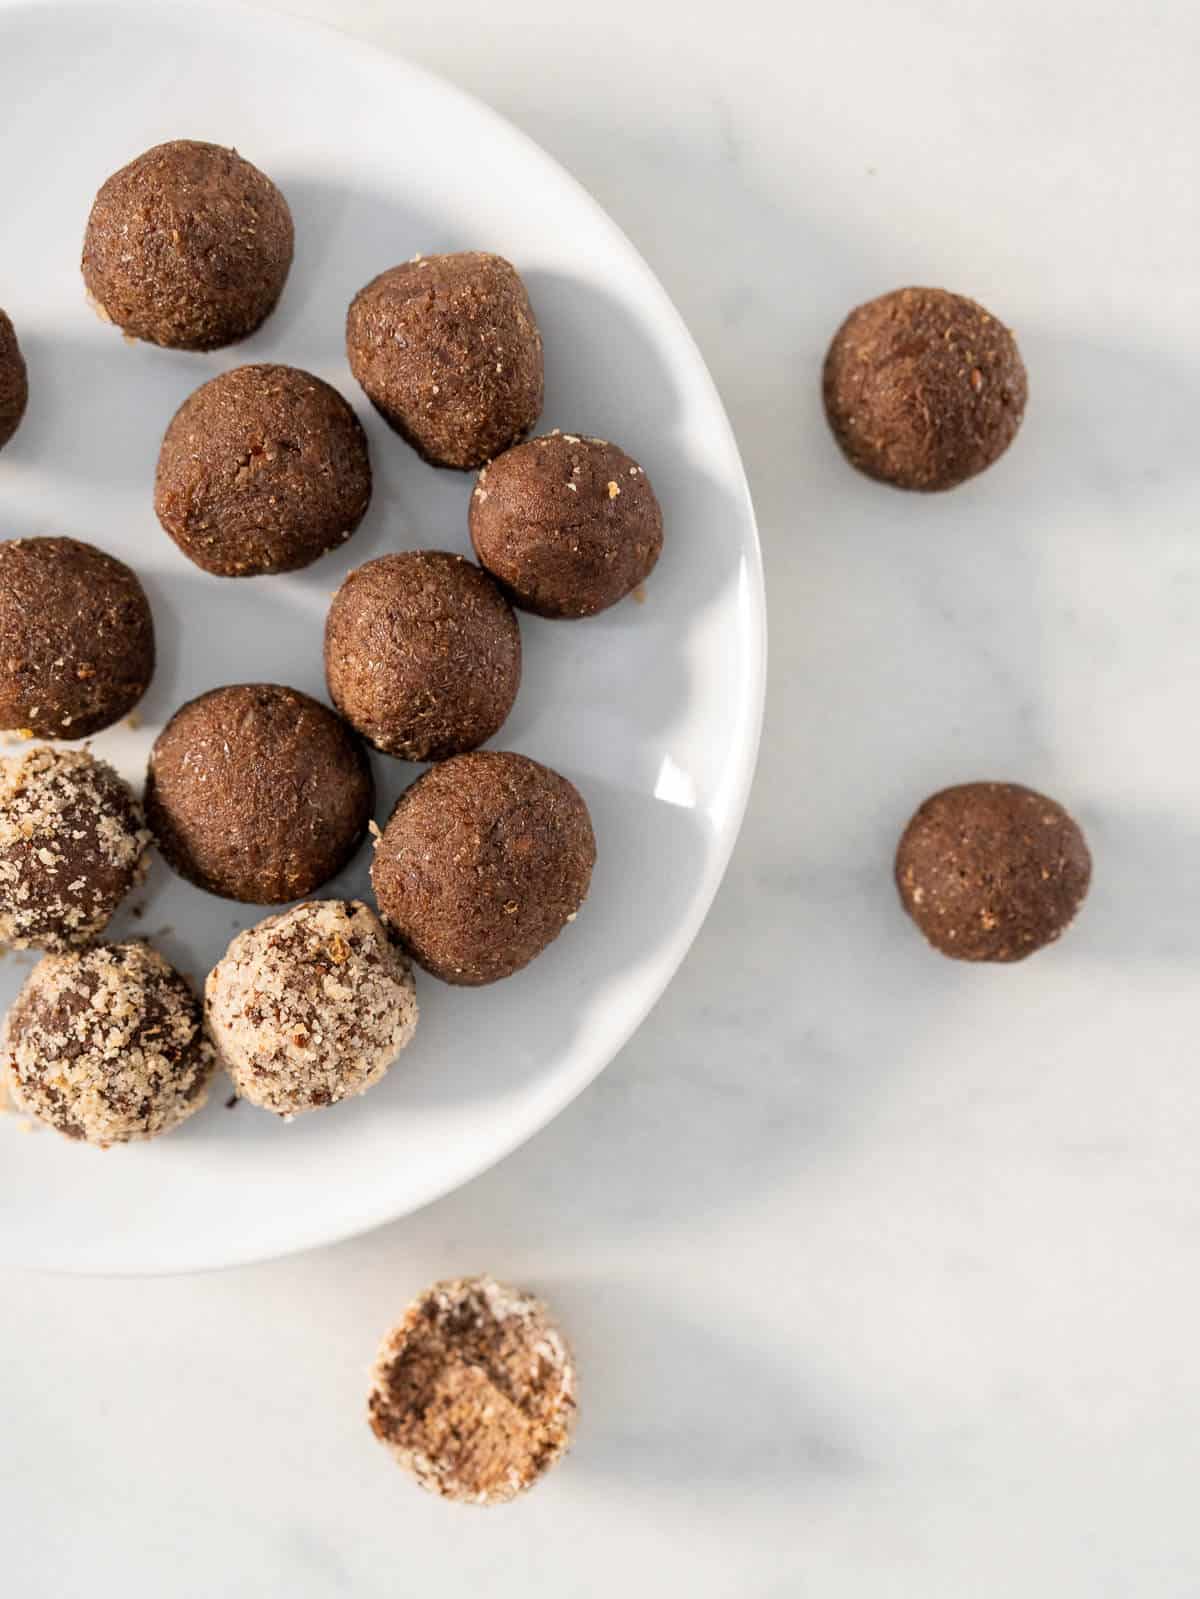 3-ingredient low calorie vegan protein balls, chocolate flavored, in a white serving plate.